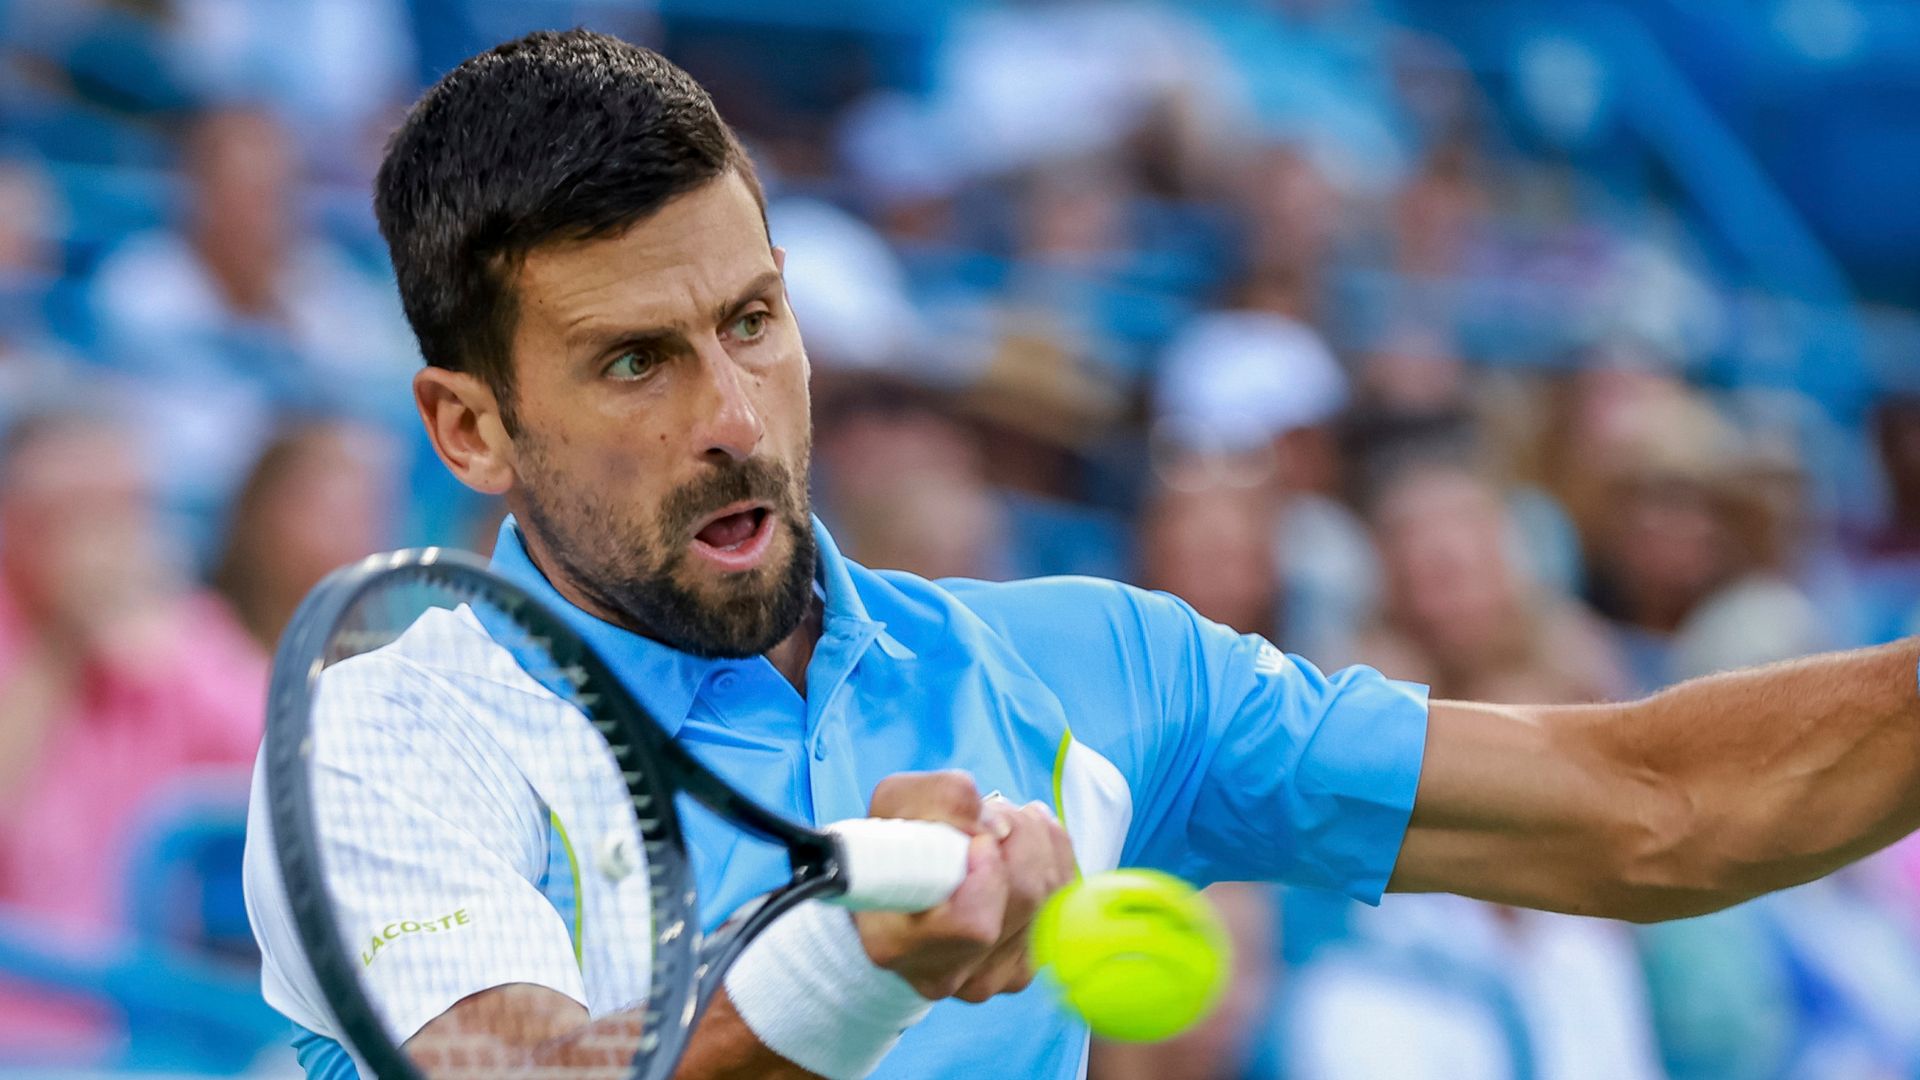 Djokovic wins on US return | 'Excited for biggest tournaments'